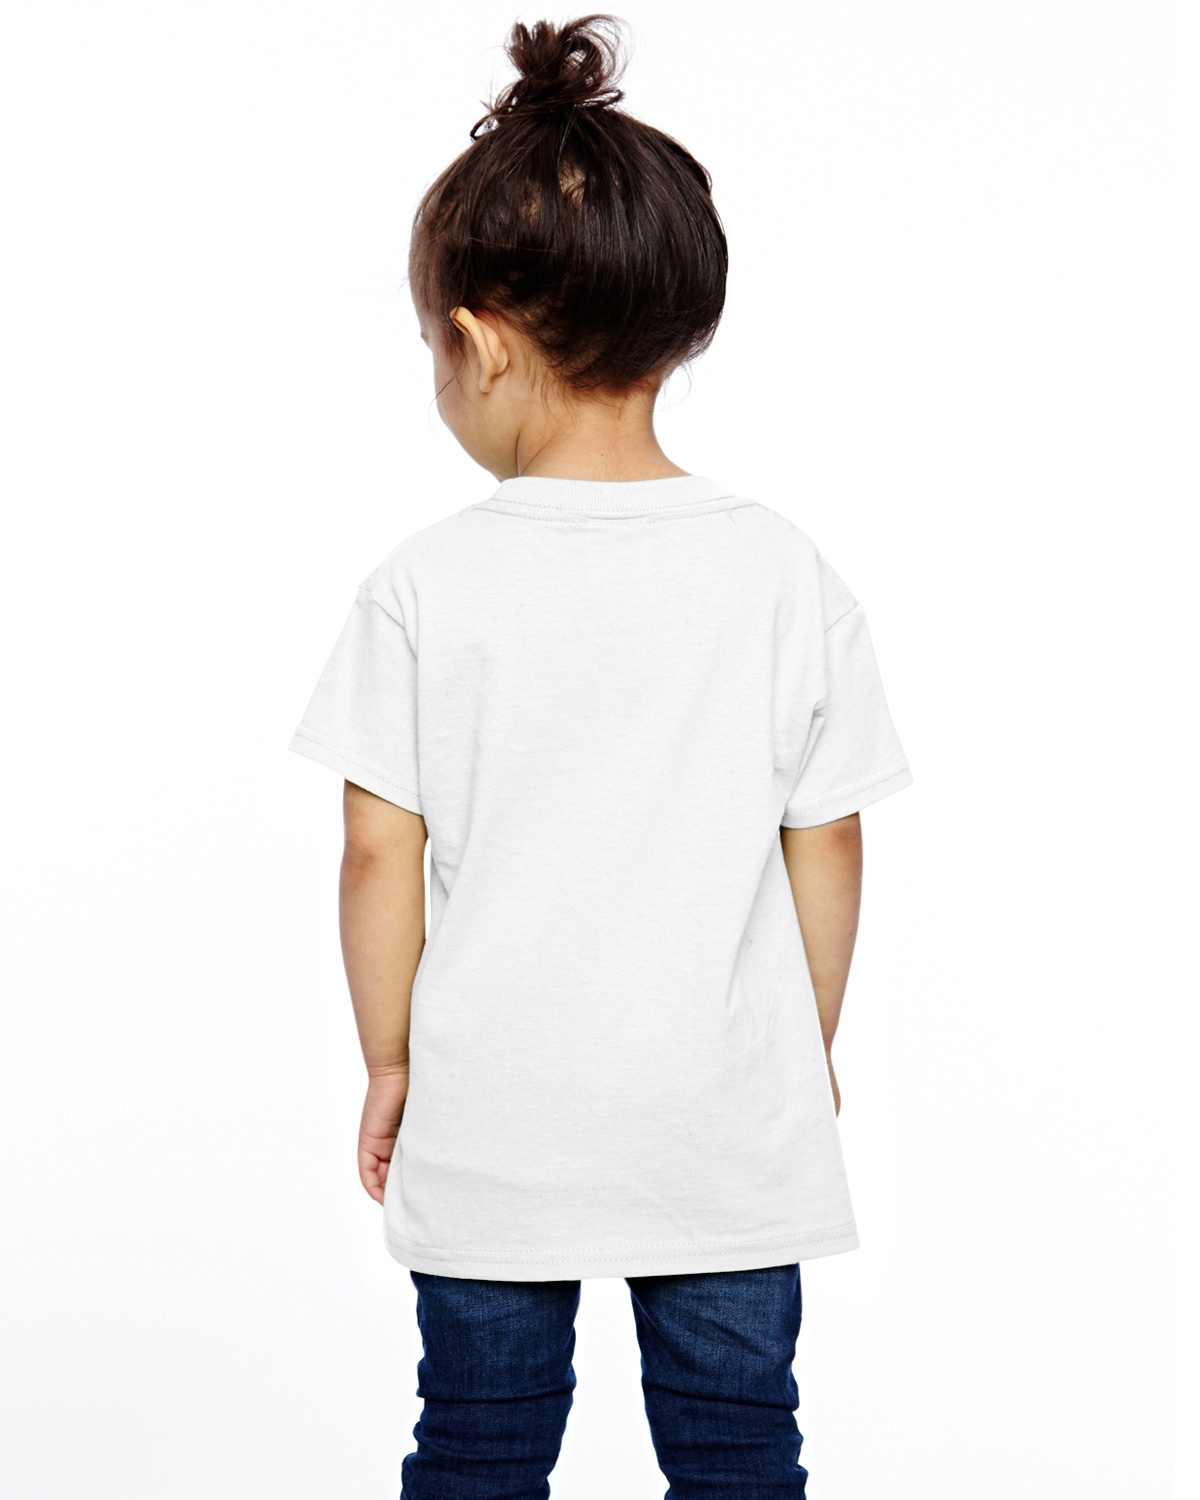 'Fruit of the Loom T3930 Toddler HD Cotton T-Shirt'